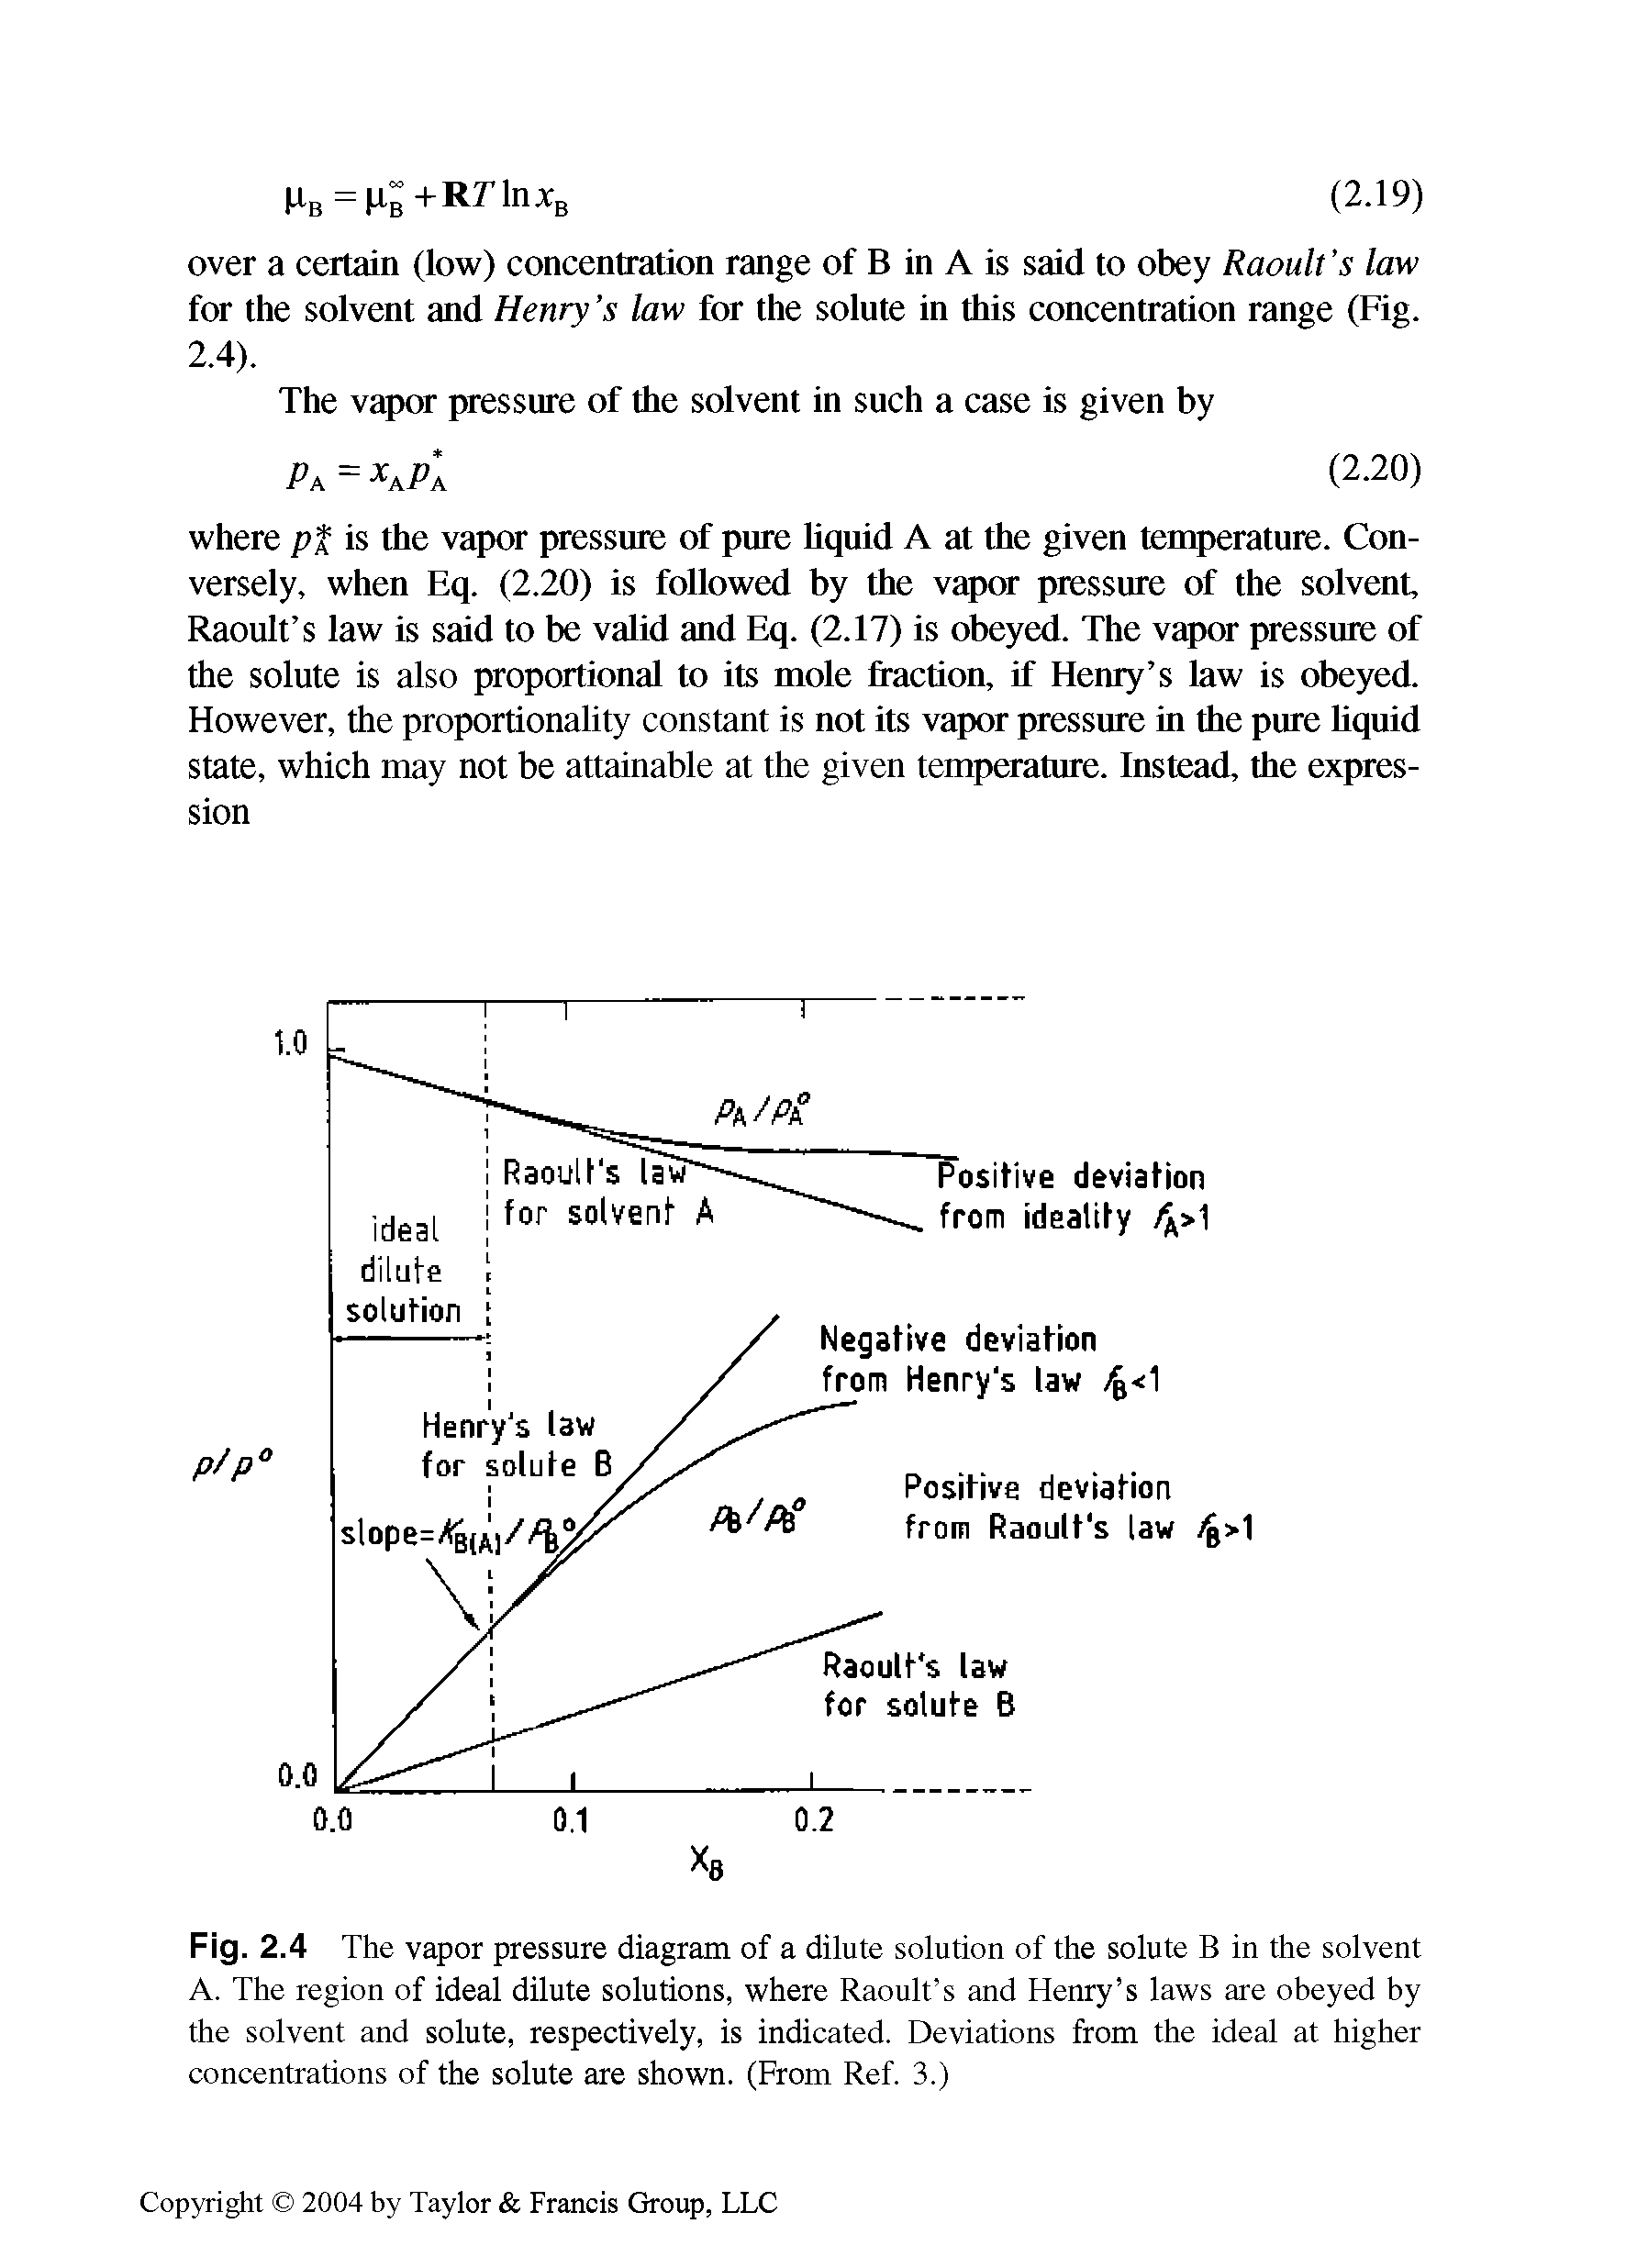 Fig. 2.4 The vapor pressure diagram of a dilute solution of the solute B in the solvent A. The region of ideal dilute solutions, where Raoult s and Henry s laws are obeyed by the solvent and solute, respectively, is indicated. Deviations from the ideal at higher concentrations of the solute are shown. (From Ref. 3.)...